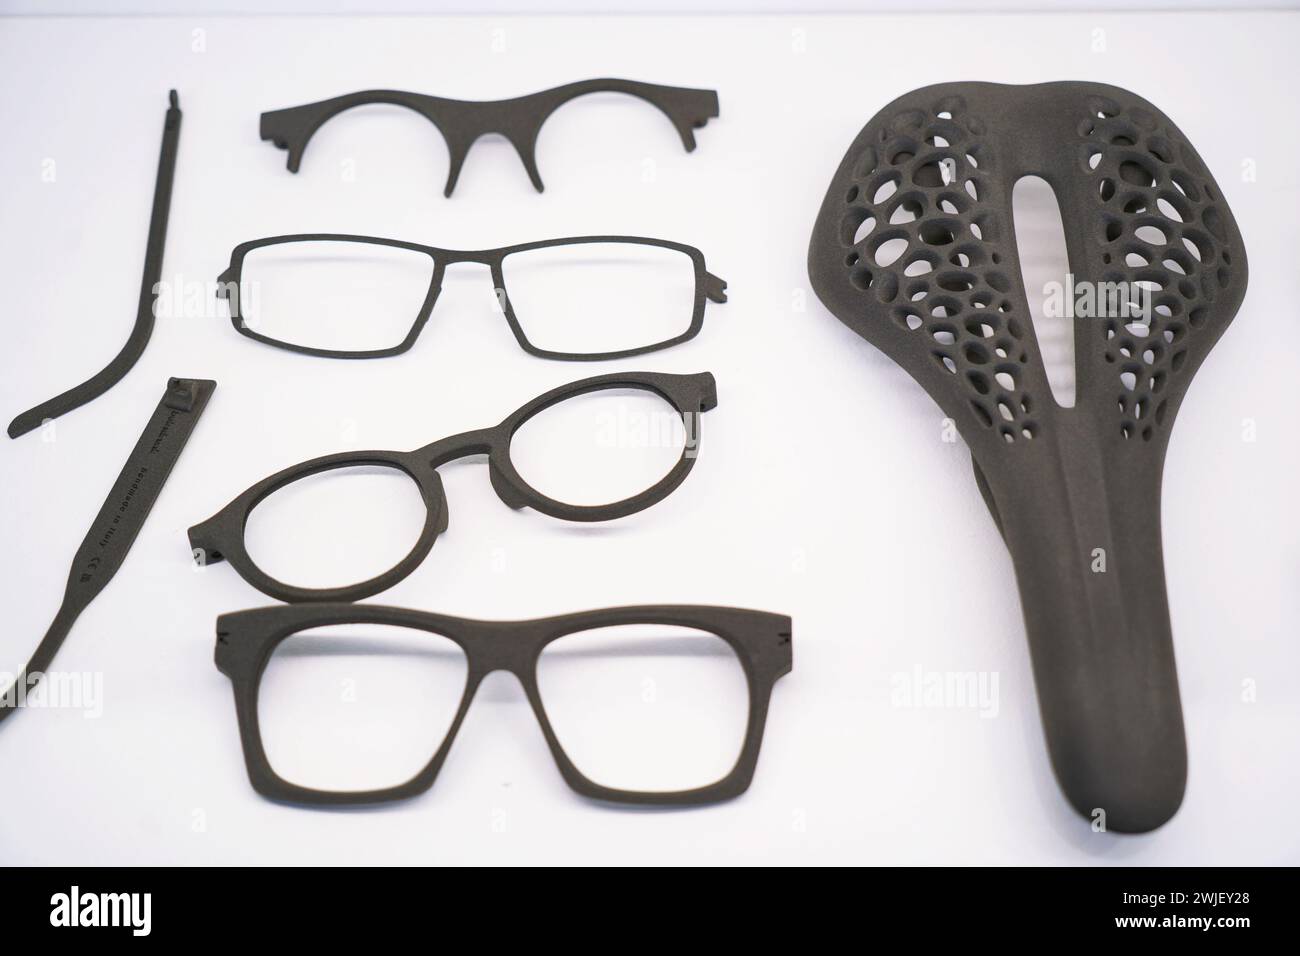 3D printed glasses and bicycle saddle Stock Photo